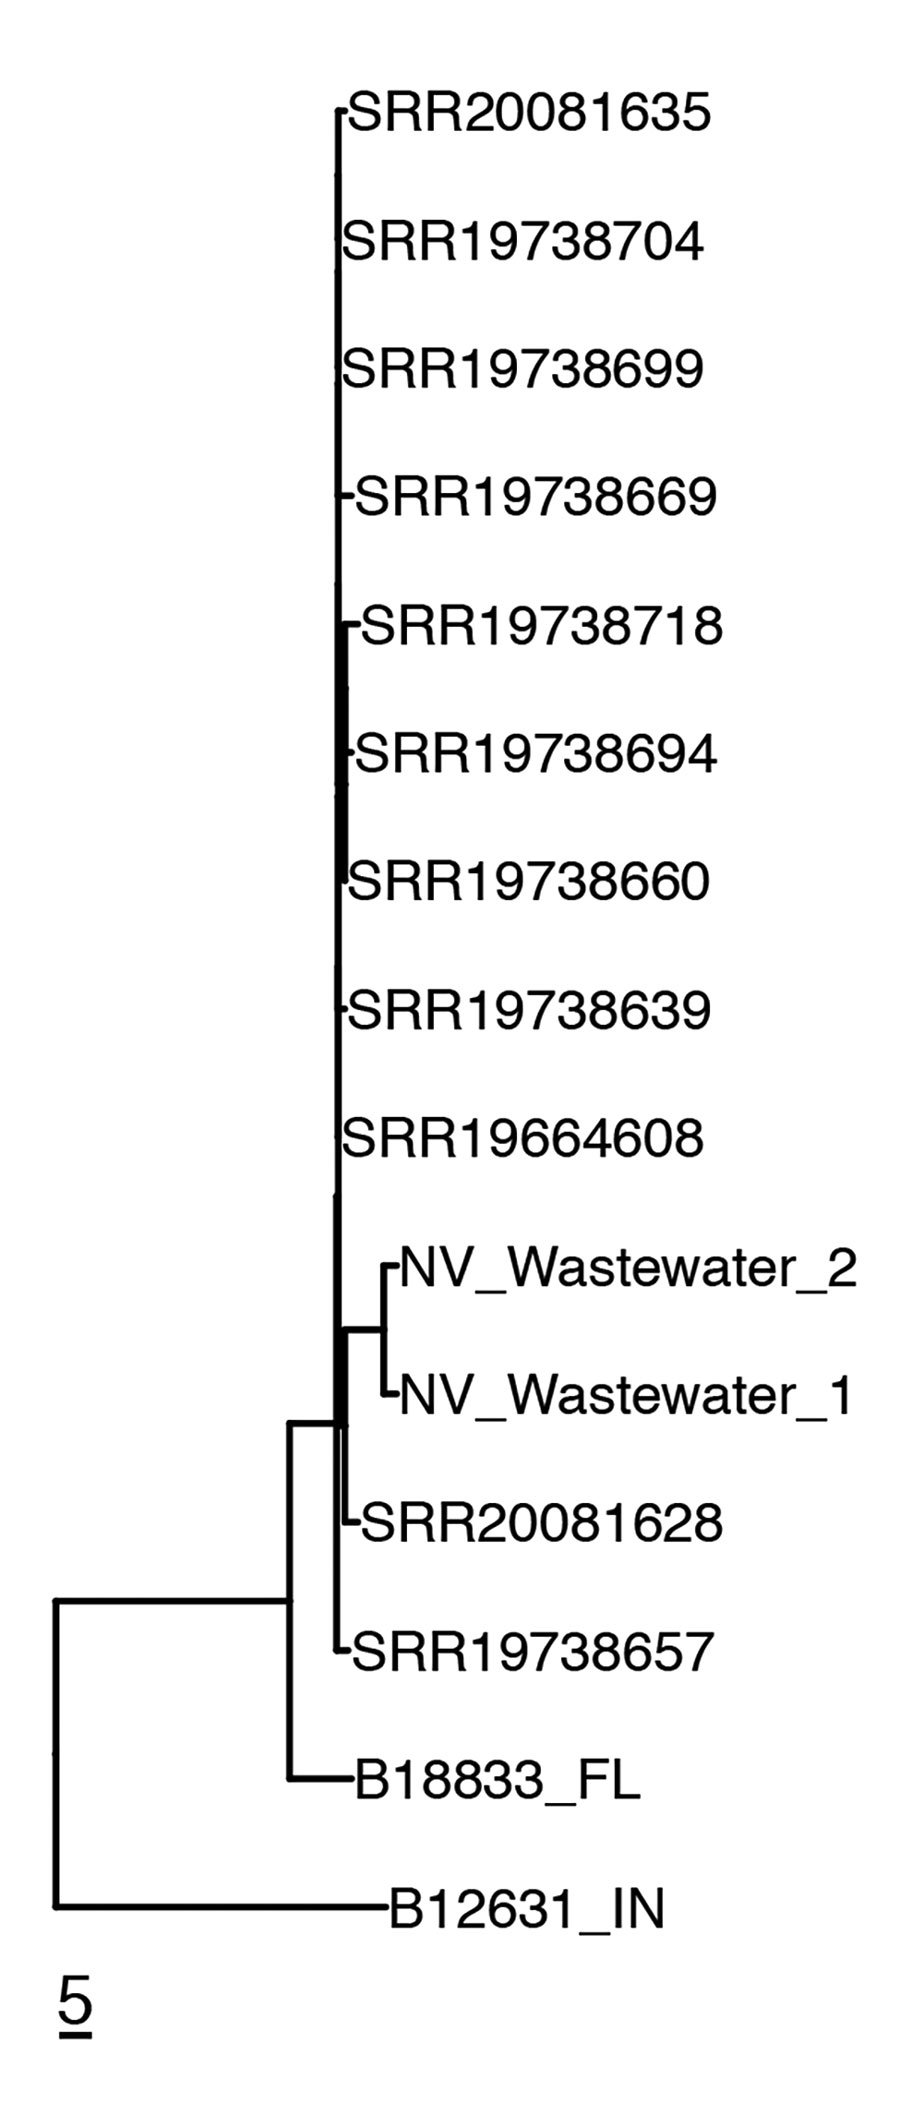 Genetic relatedness of clinical and wastewater isolates identified in the southern Nevada, USA, 2022, to reference clinical isolates. Neighbor-joining phylogenetic tree shows clade III C. auris isolates recovered from 3 southern Nevada acute care hospitals (identified by National Center for Biotechnology Information Sequence Read Archive [SRA] accession number) and from the wastewater treatment plants to which they were connected (NV_Wastewater_1 [SRA accession no. SRR21758525] and NV_Wastewater_2[SRA accession no. SRR21758524]). Two unrelated isolates from Florida and Indiana are included in the tree: B188833_FL (SRA accession no. SRR12526241) and B12631_IN (SRA accession no. SRR7909359). Scale bar indicates single-nucleotide polymorphisms.